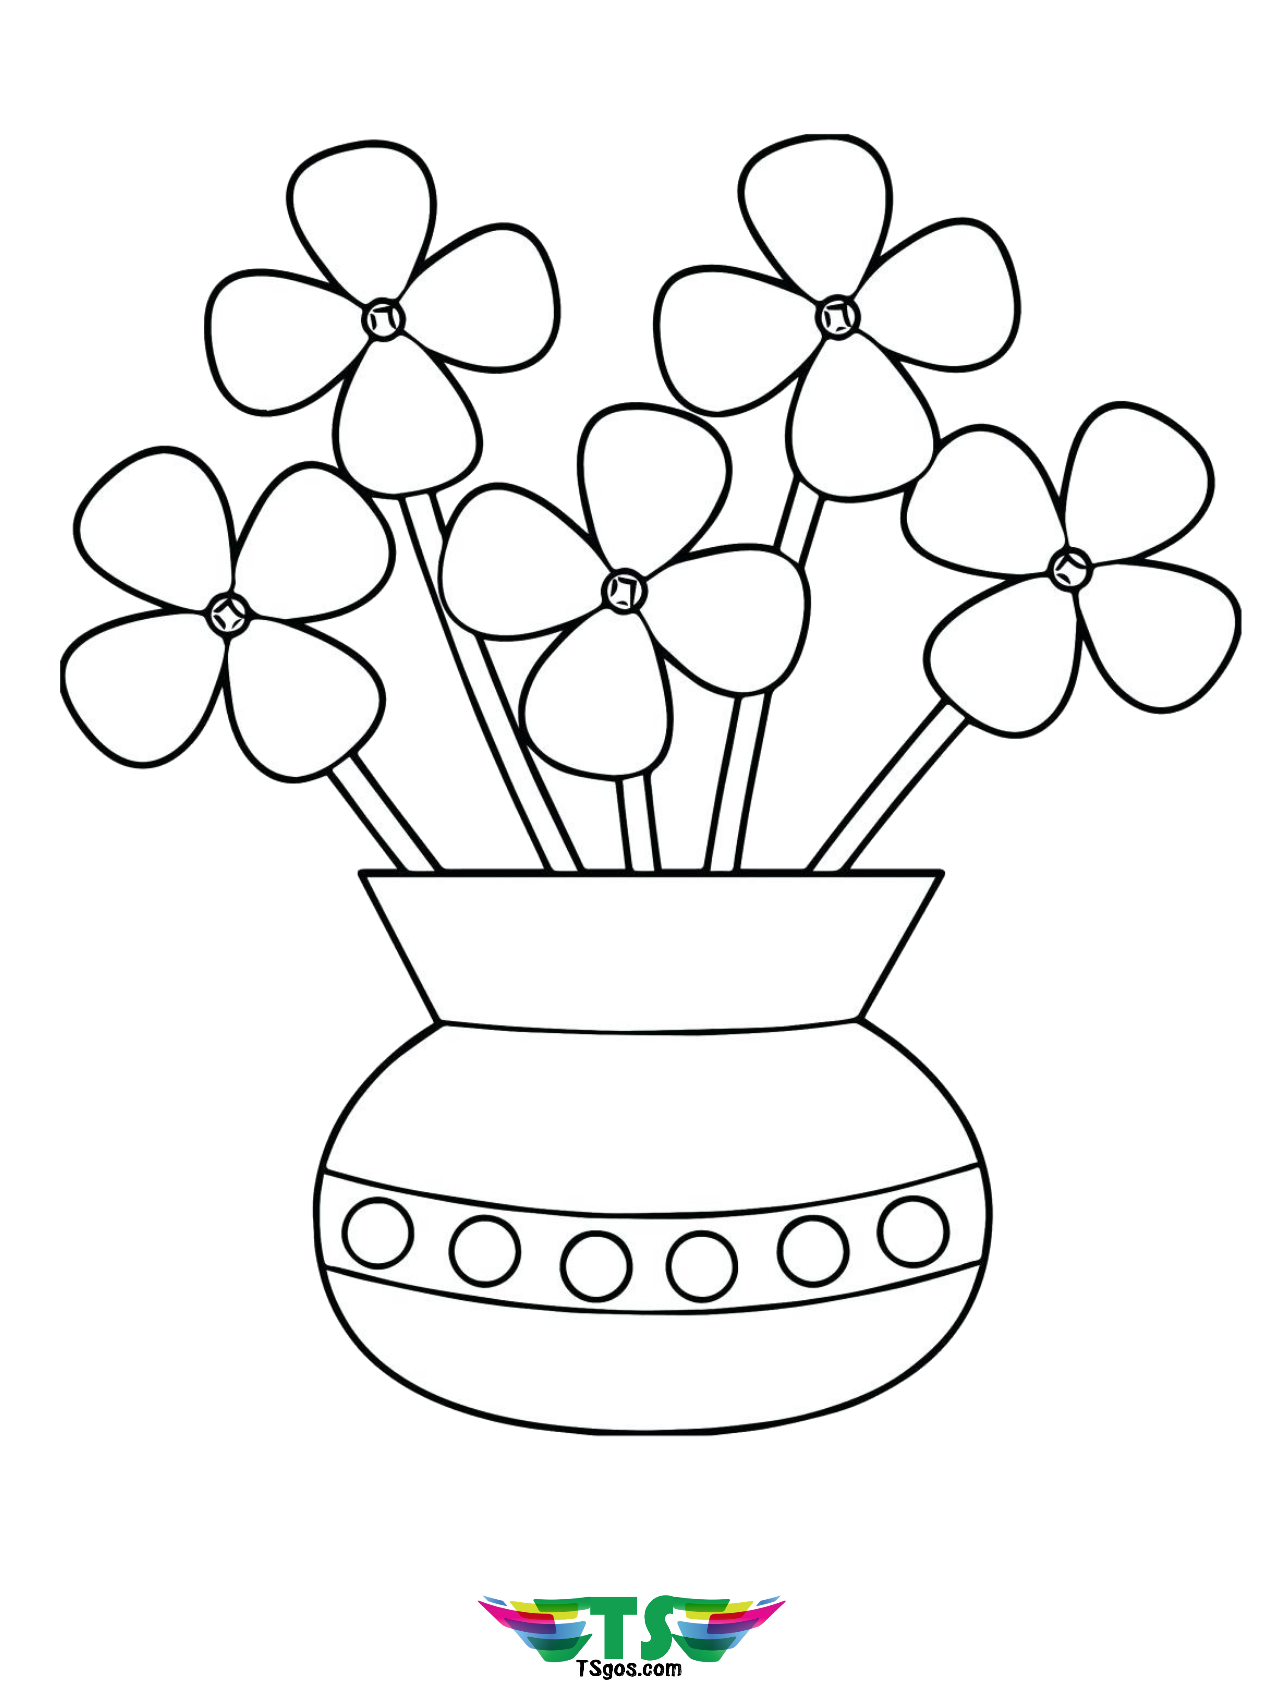 Printable Flowers in a Vase Coloring Page